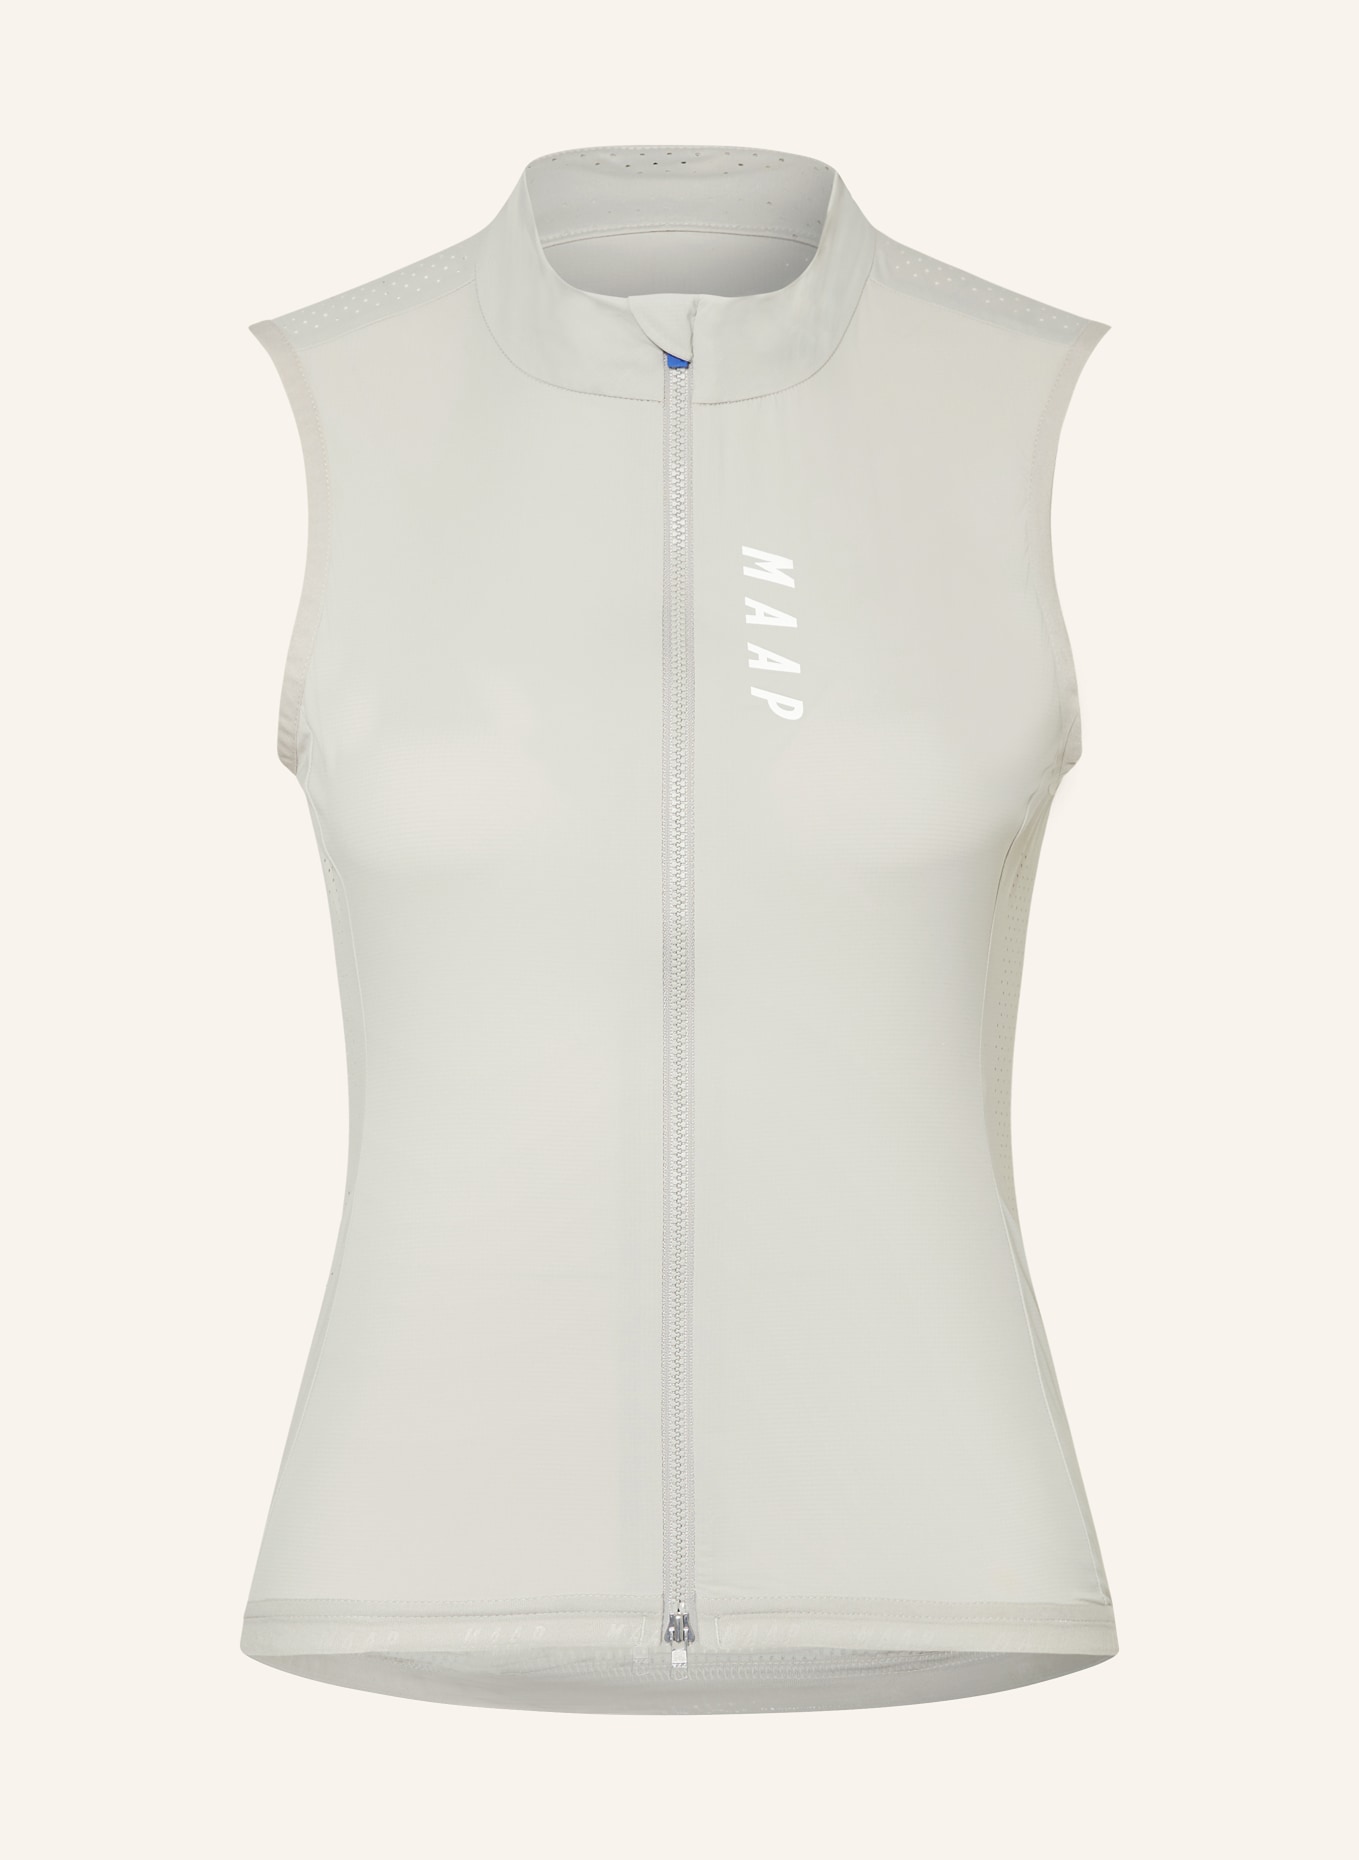 MAAP Cycling vest DRAFT TEAM, Color: LIGHT GRAY (Image 1)